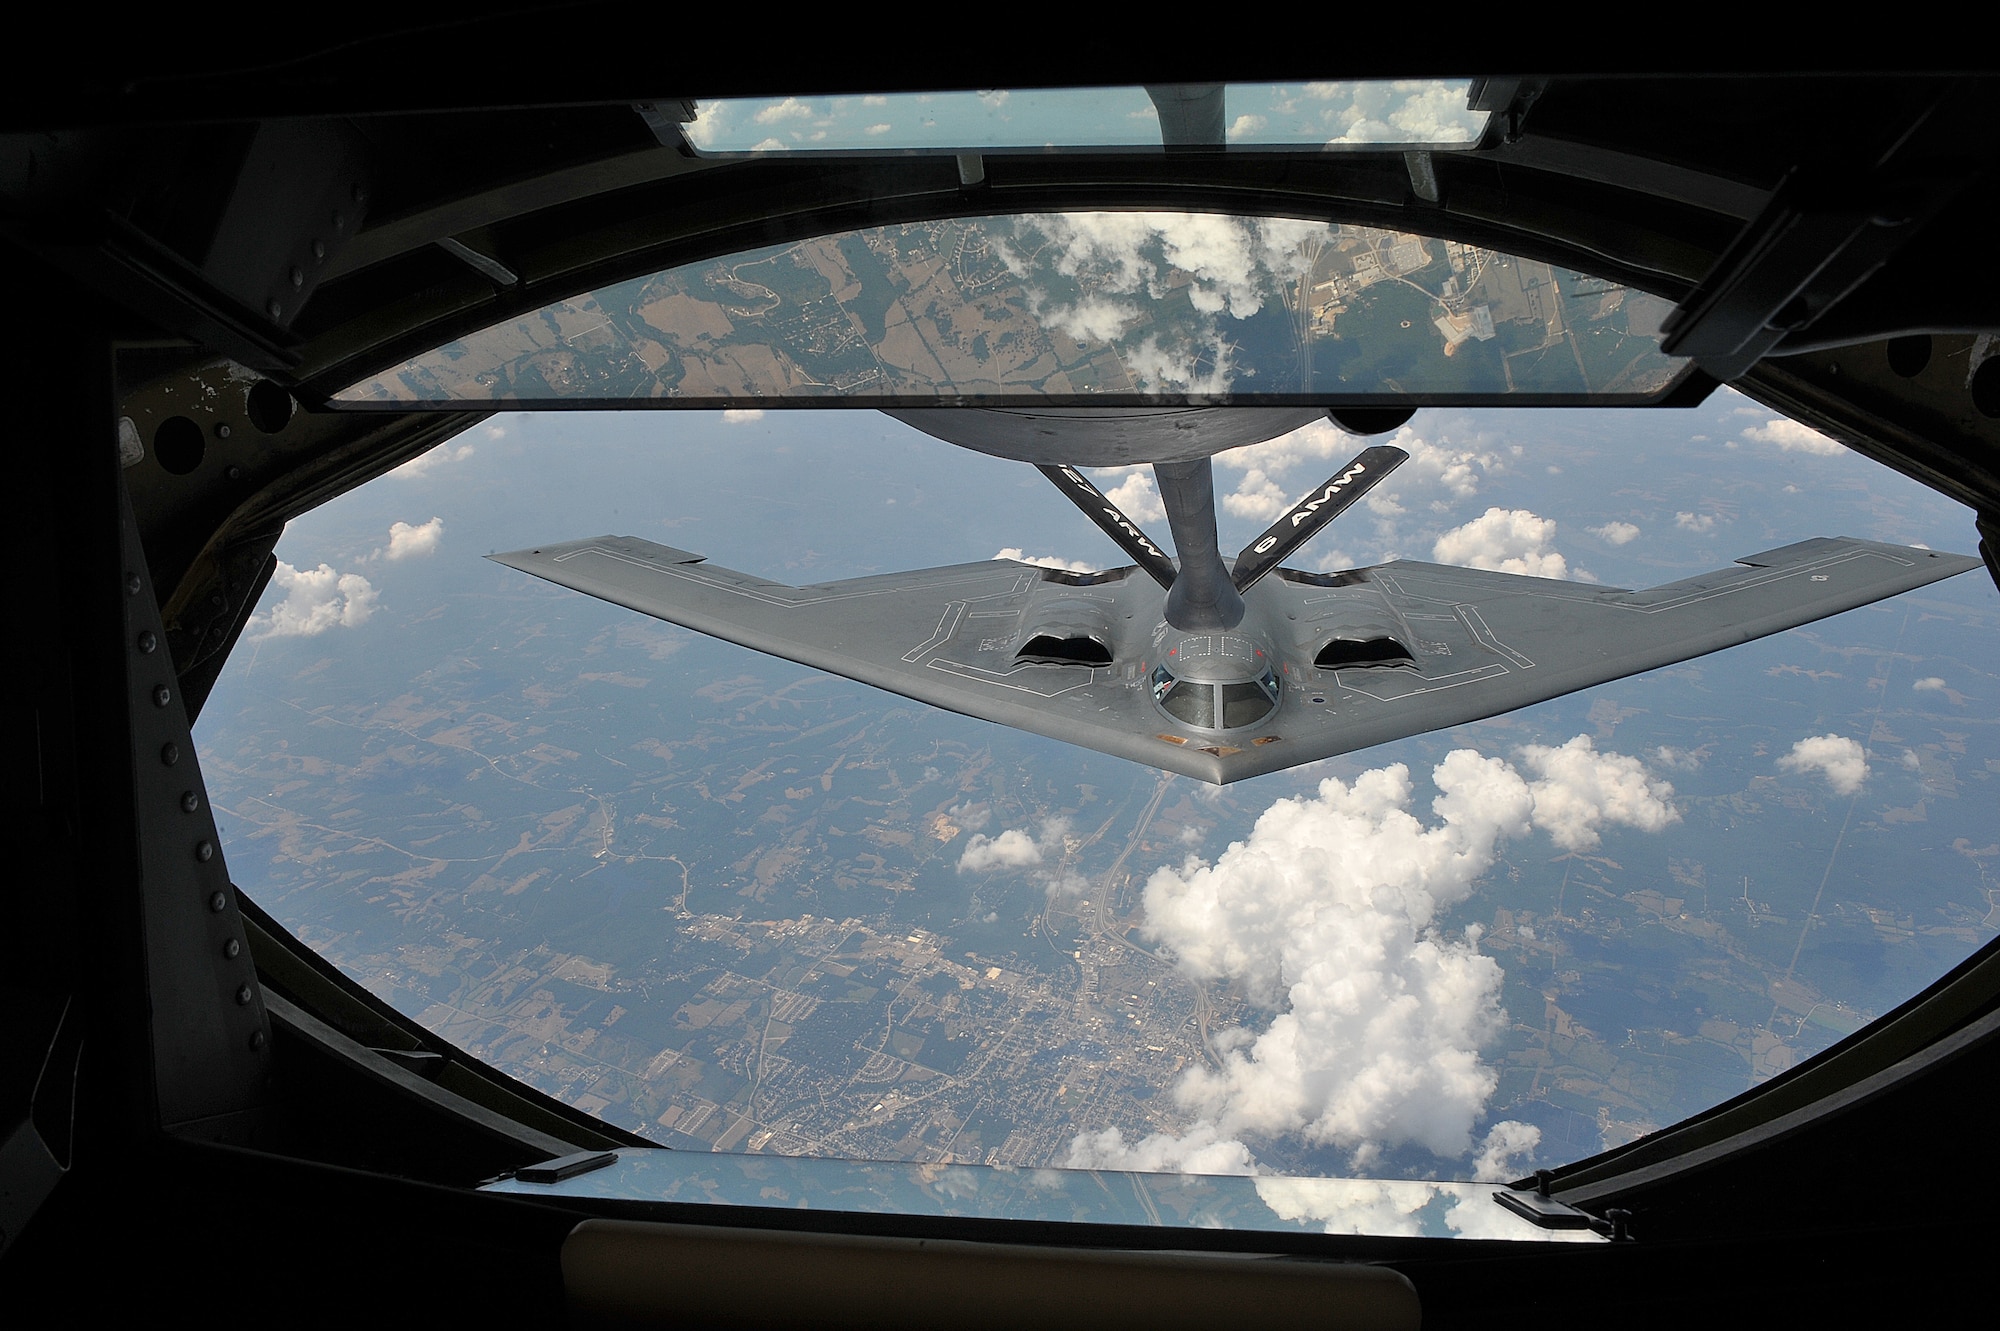 A KC-135 Stratotanker from the 22nd Air Refueling Wing refuels a B-2 Spirit from the 509th Bomb Wing, July 12, 2012. The 509th BW can launch combat sorties directly from Missouri to any spot on the globe, engaging adversaries with large payloads of traditional or precision-guided munitions. (U.S. Air Force photo/Airman 1st Class Maurice A. Hodges)